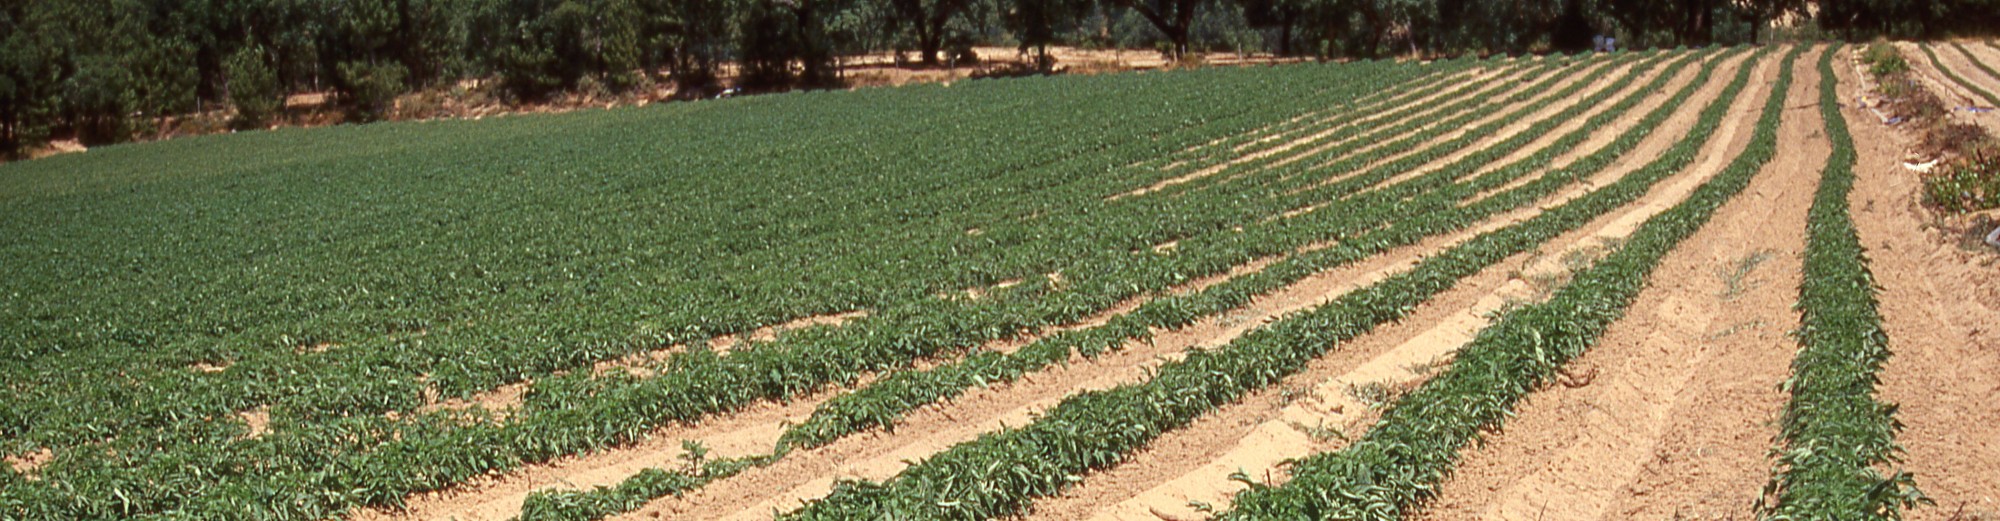 Agriculture in Portugal: Food, Development and Sustainability (1870-2010)